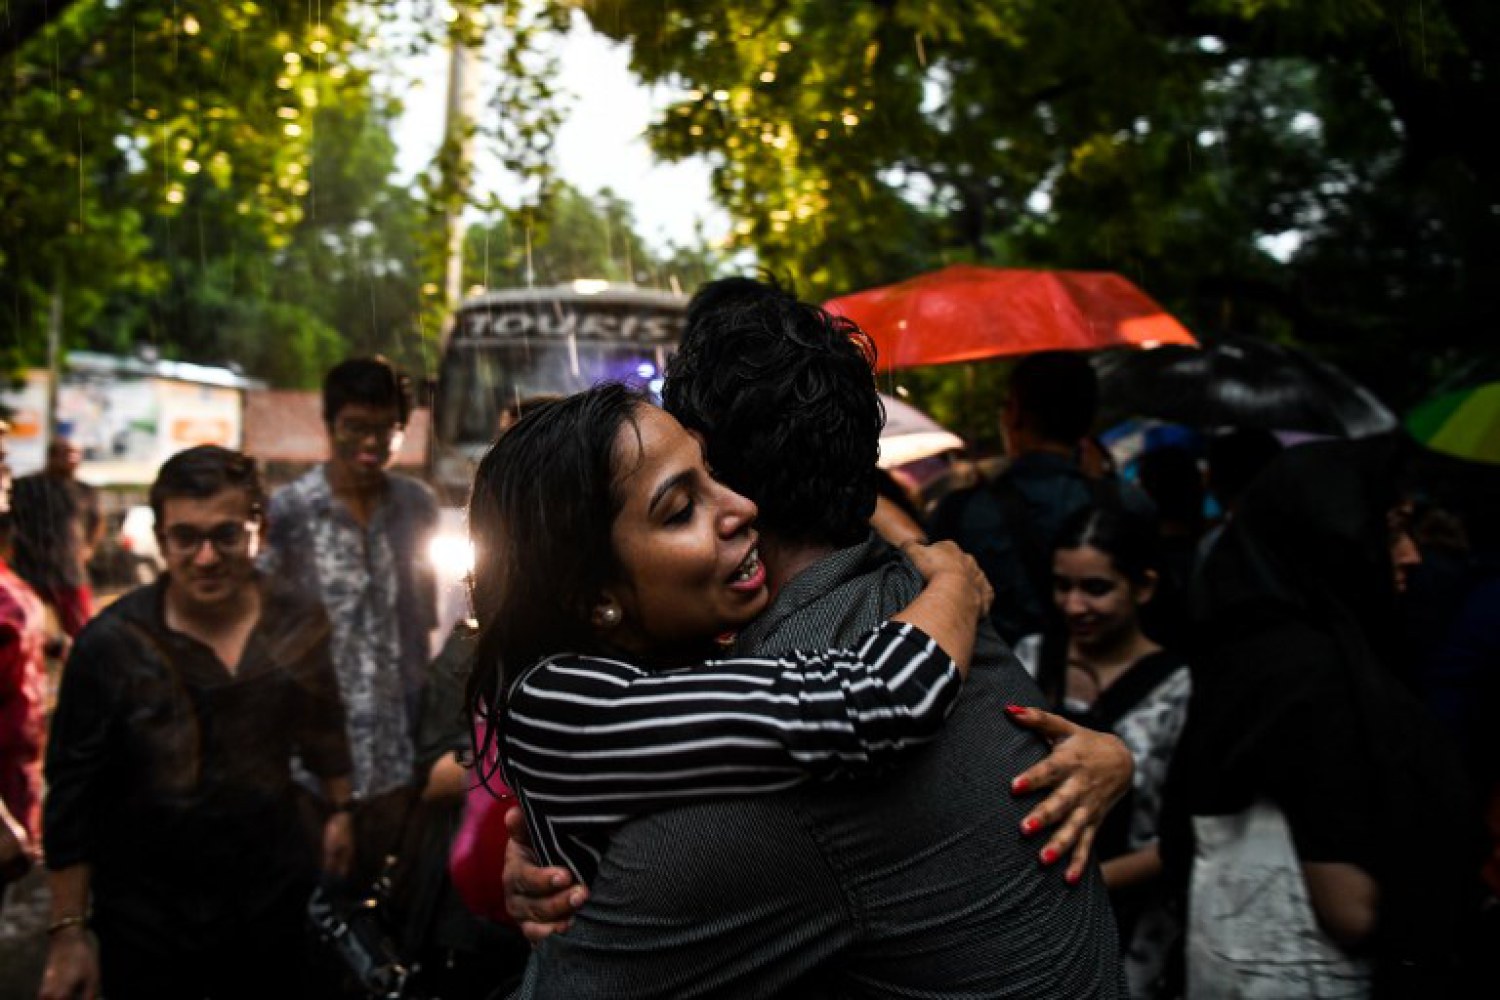 Indian members and supporters of the lesbian, gay, bisexual, transgender (LGBT) community celebrate the Supreme Court decision to strike down a colonial-era ban on gay sex, during heavy rainfall in New Delhi on September 6, 2018.